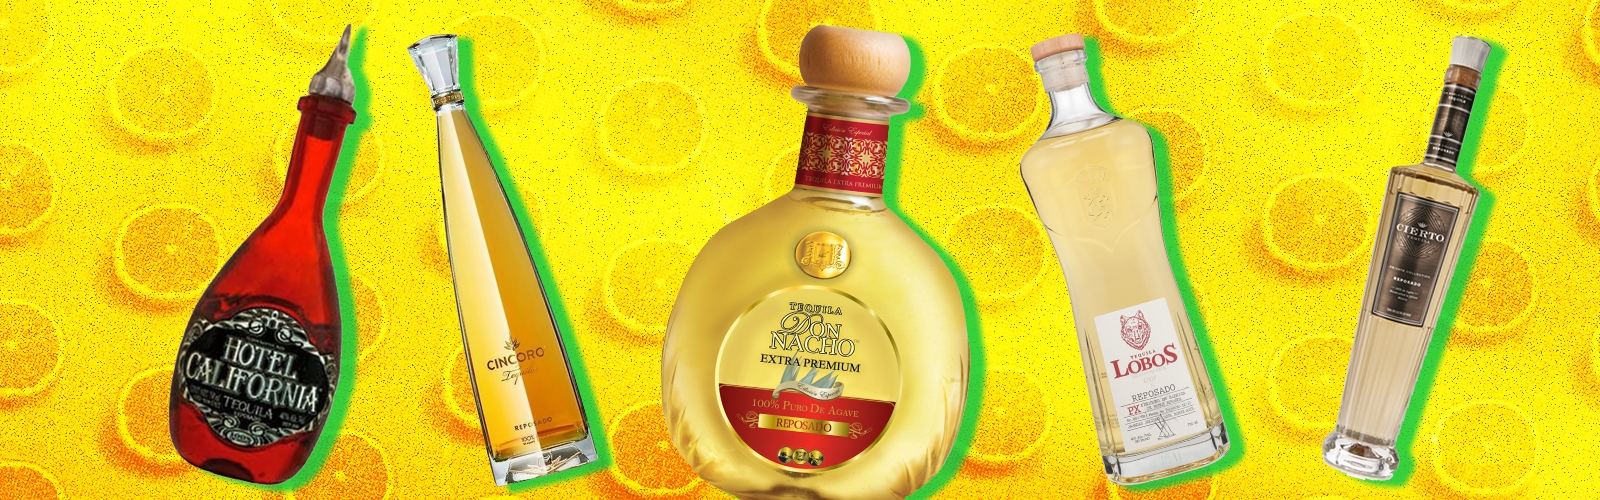 Double Gold Reposado Tequila